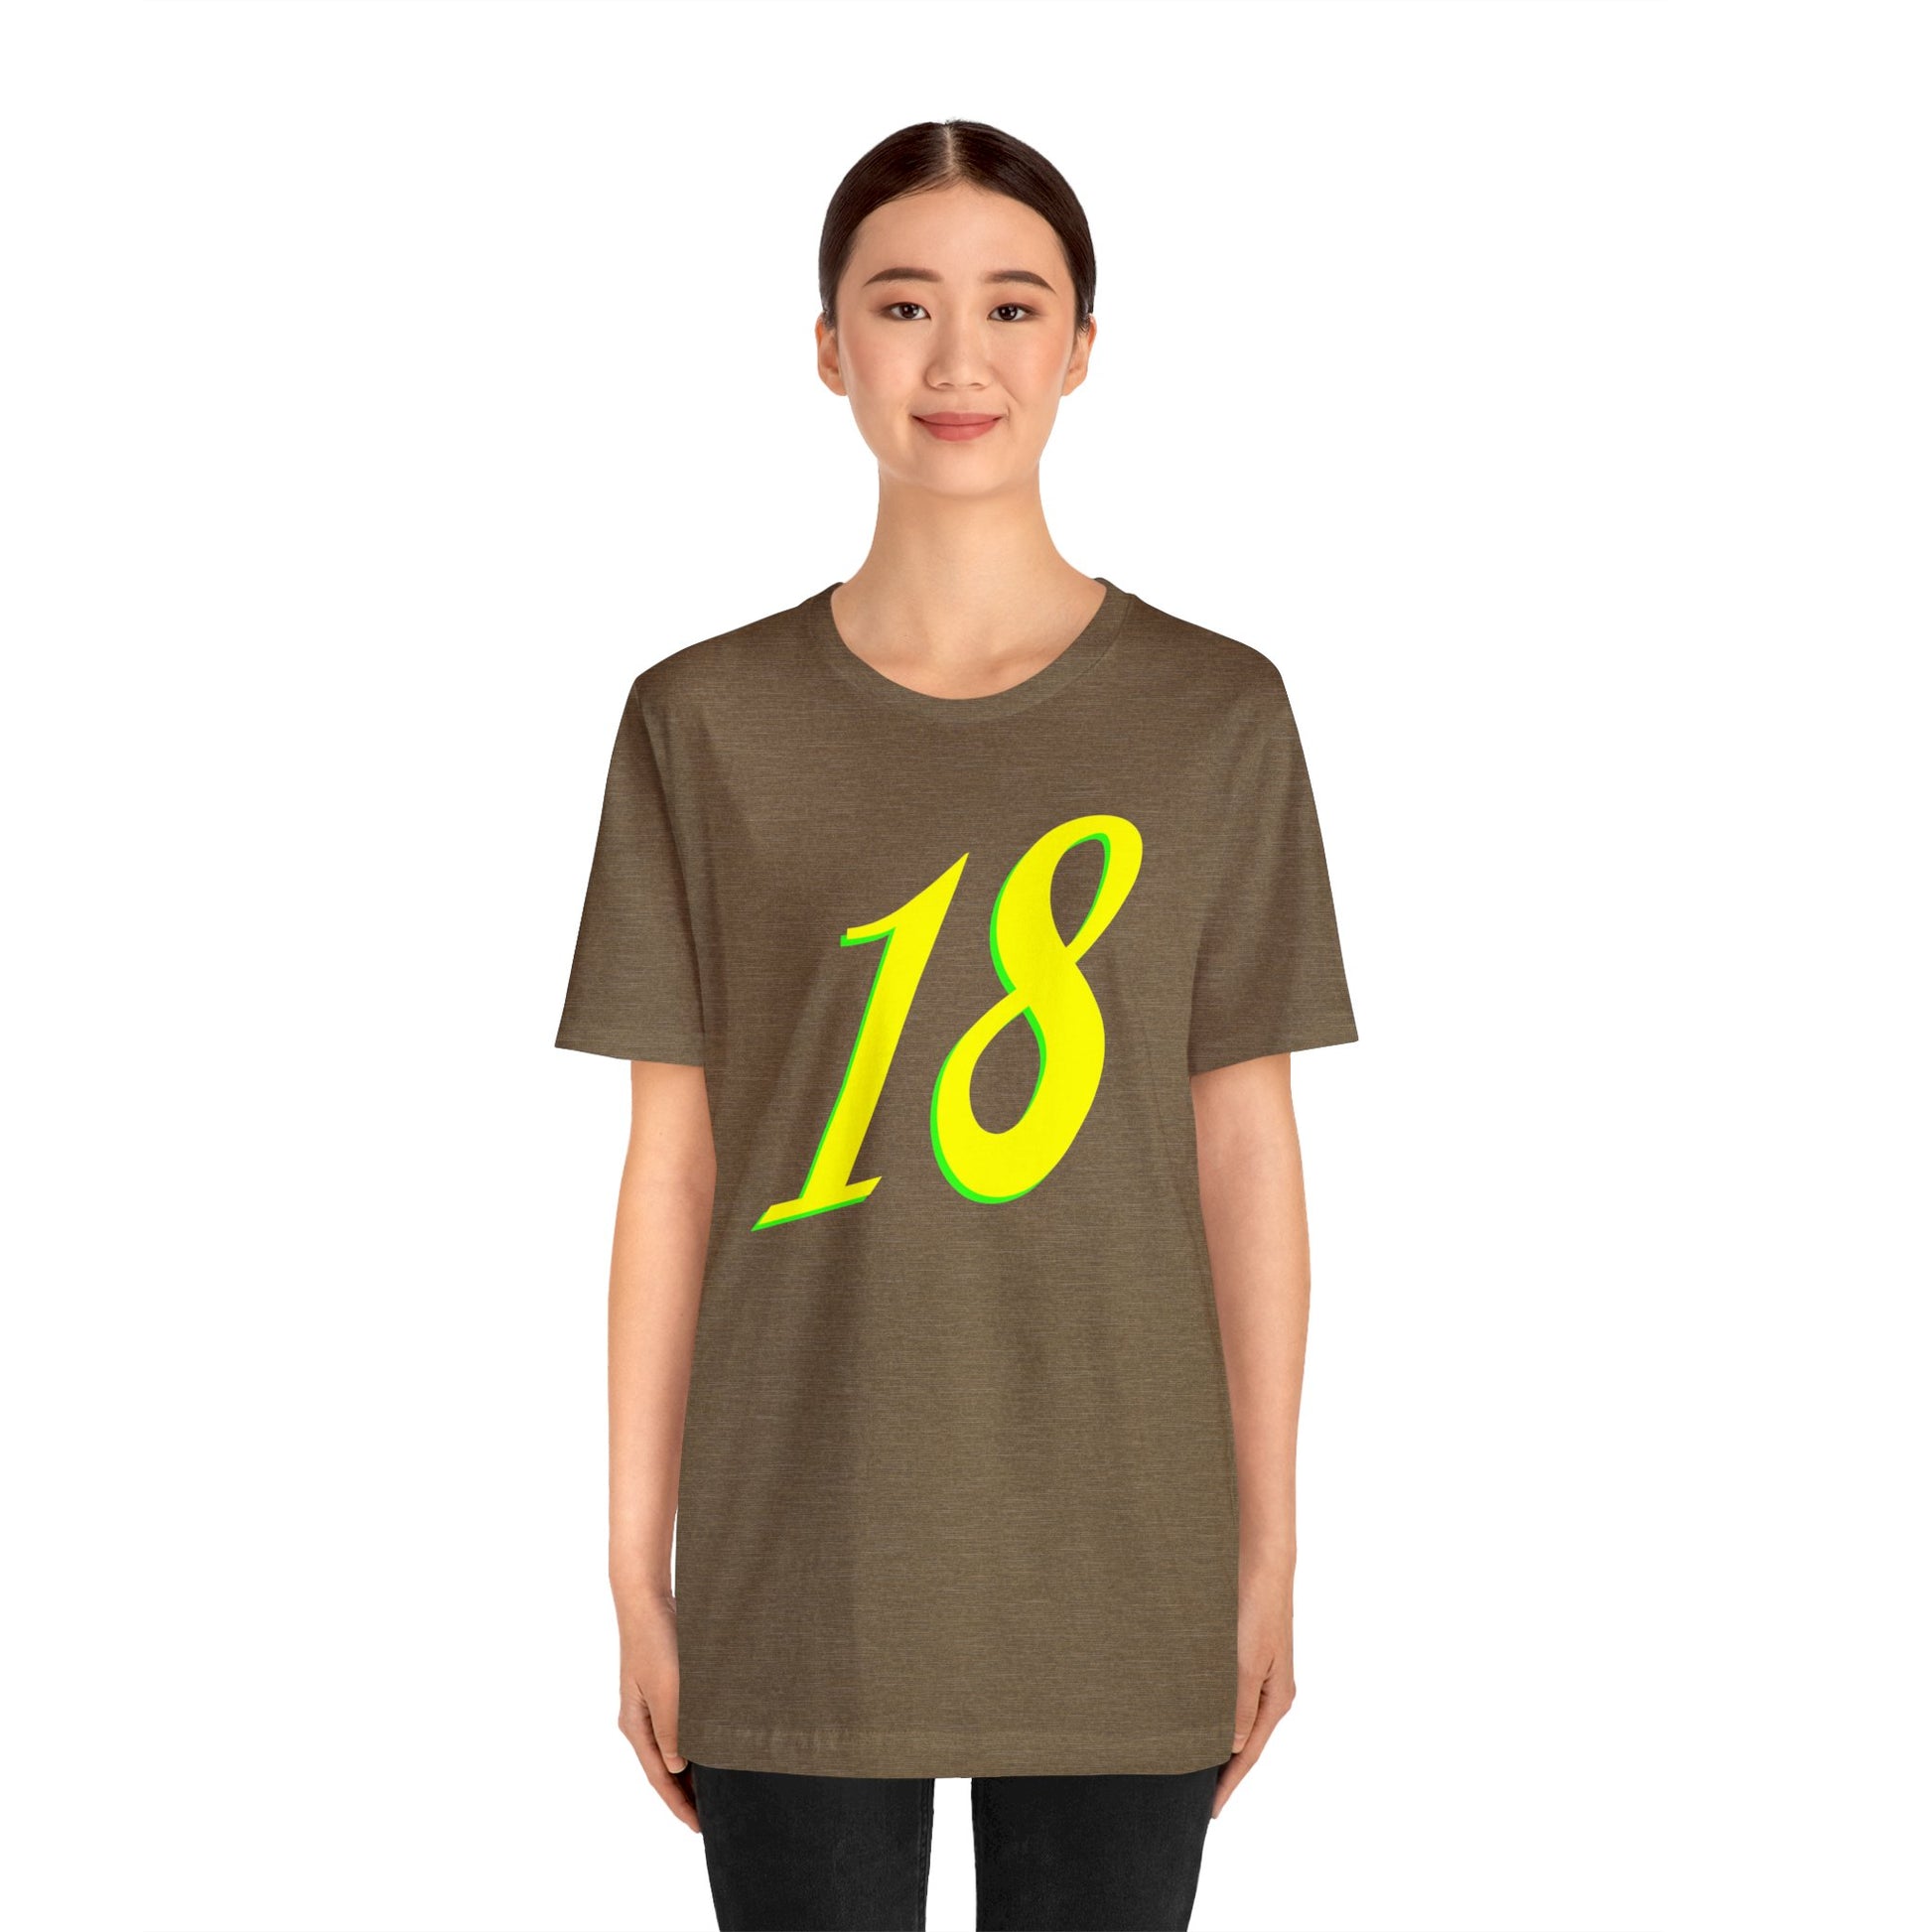 Number 18 Design - Soft Cotton Tee for birthdays and celebrations, Gift for friends and family, Multiple Options by clothezy.com in Royal Blue Heather Size Medium - Buy Now